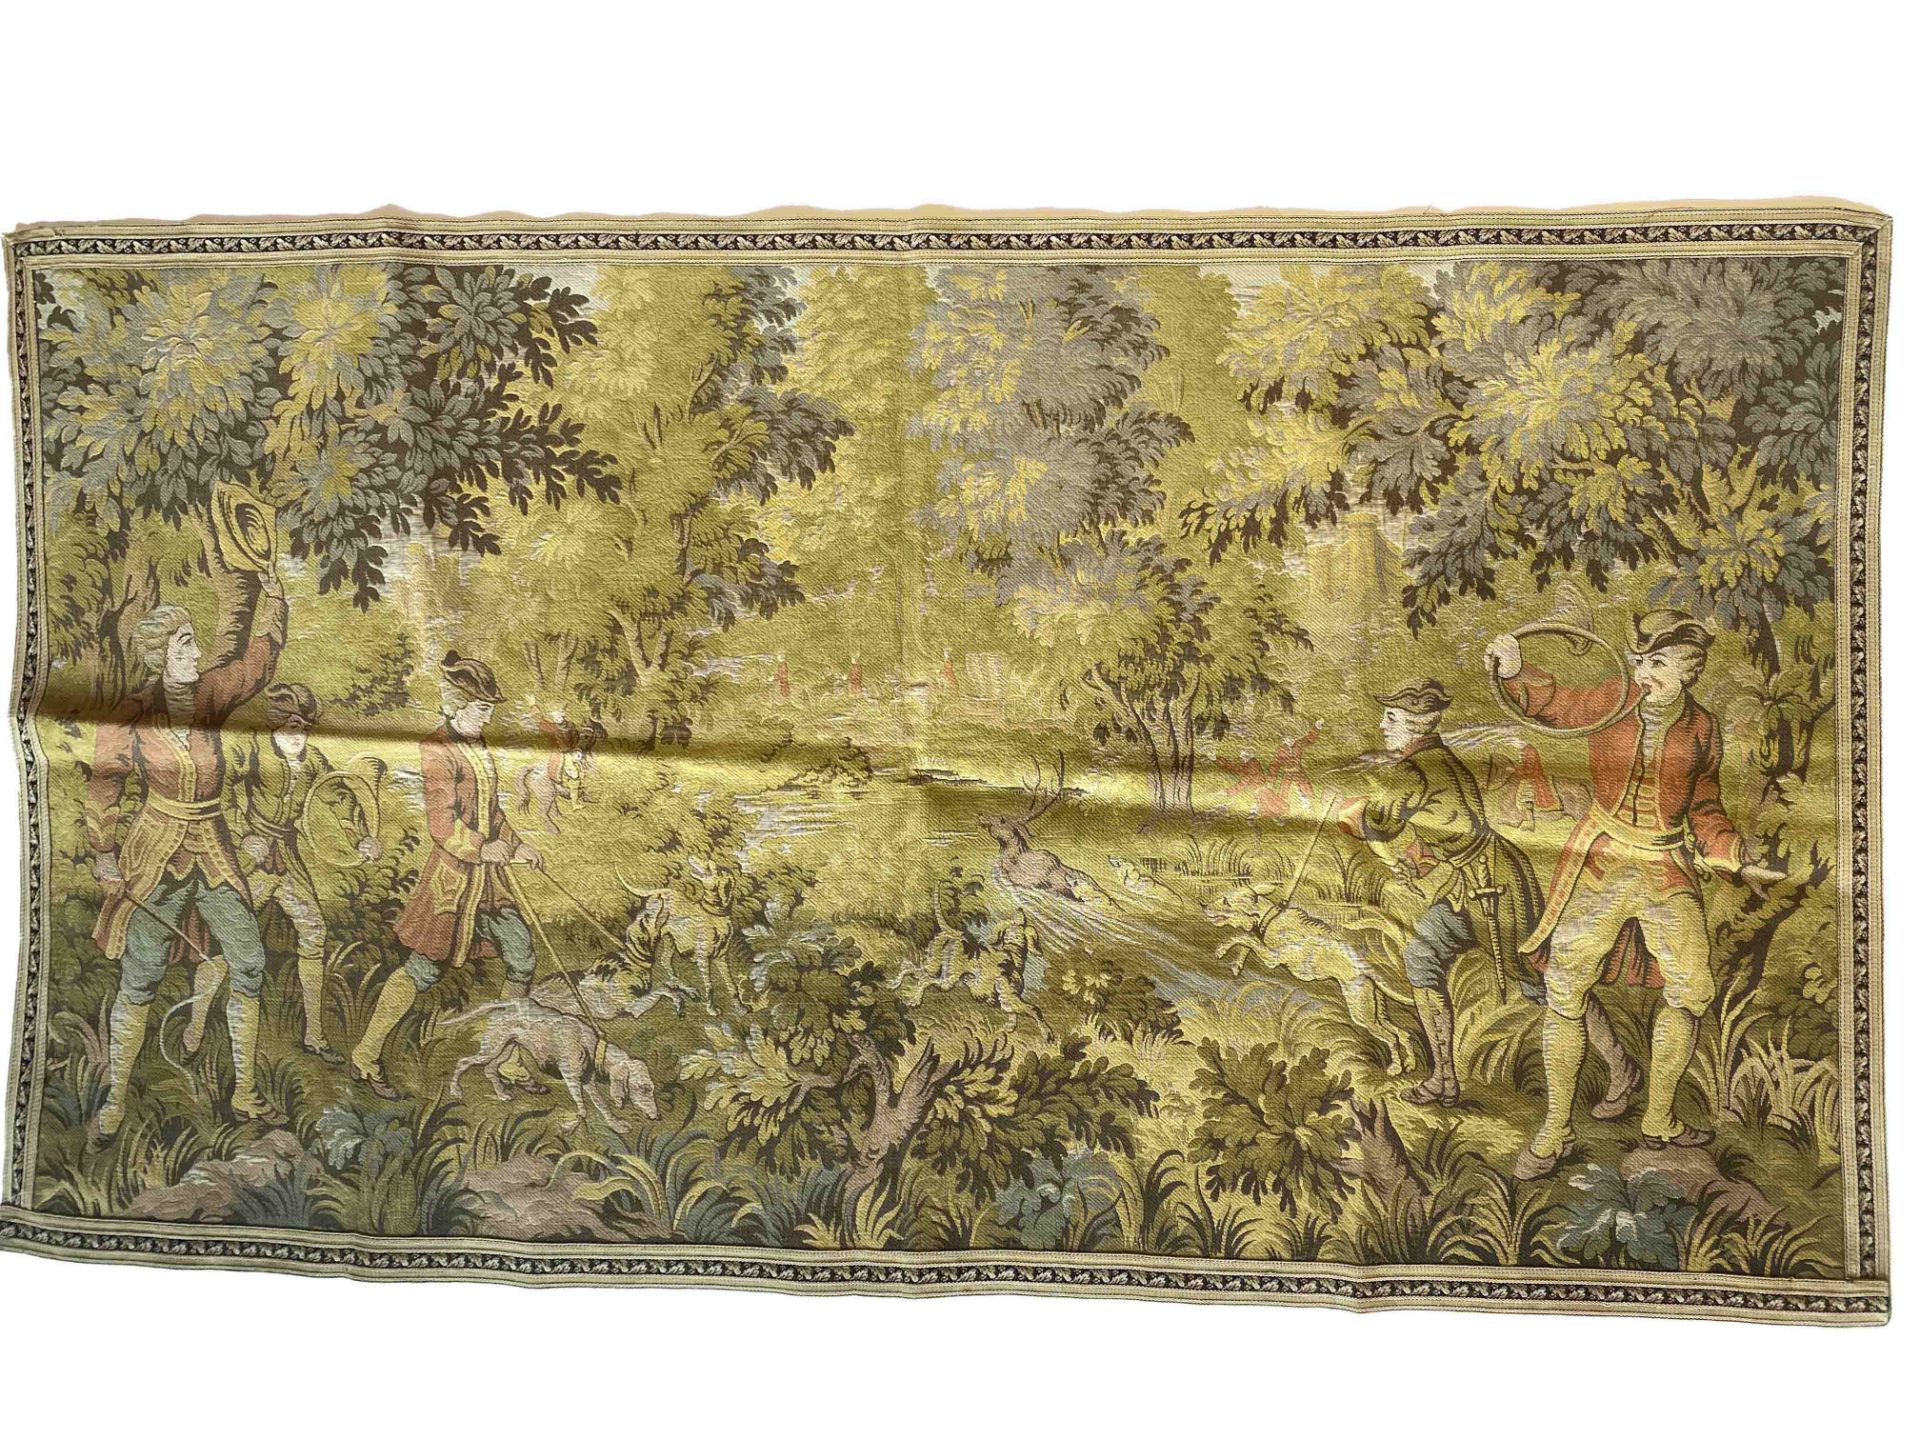 Gobelin, good condition, 170 x 87 cm - The carpet can only be viewed and collected at another